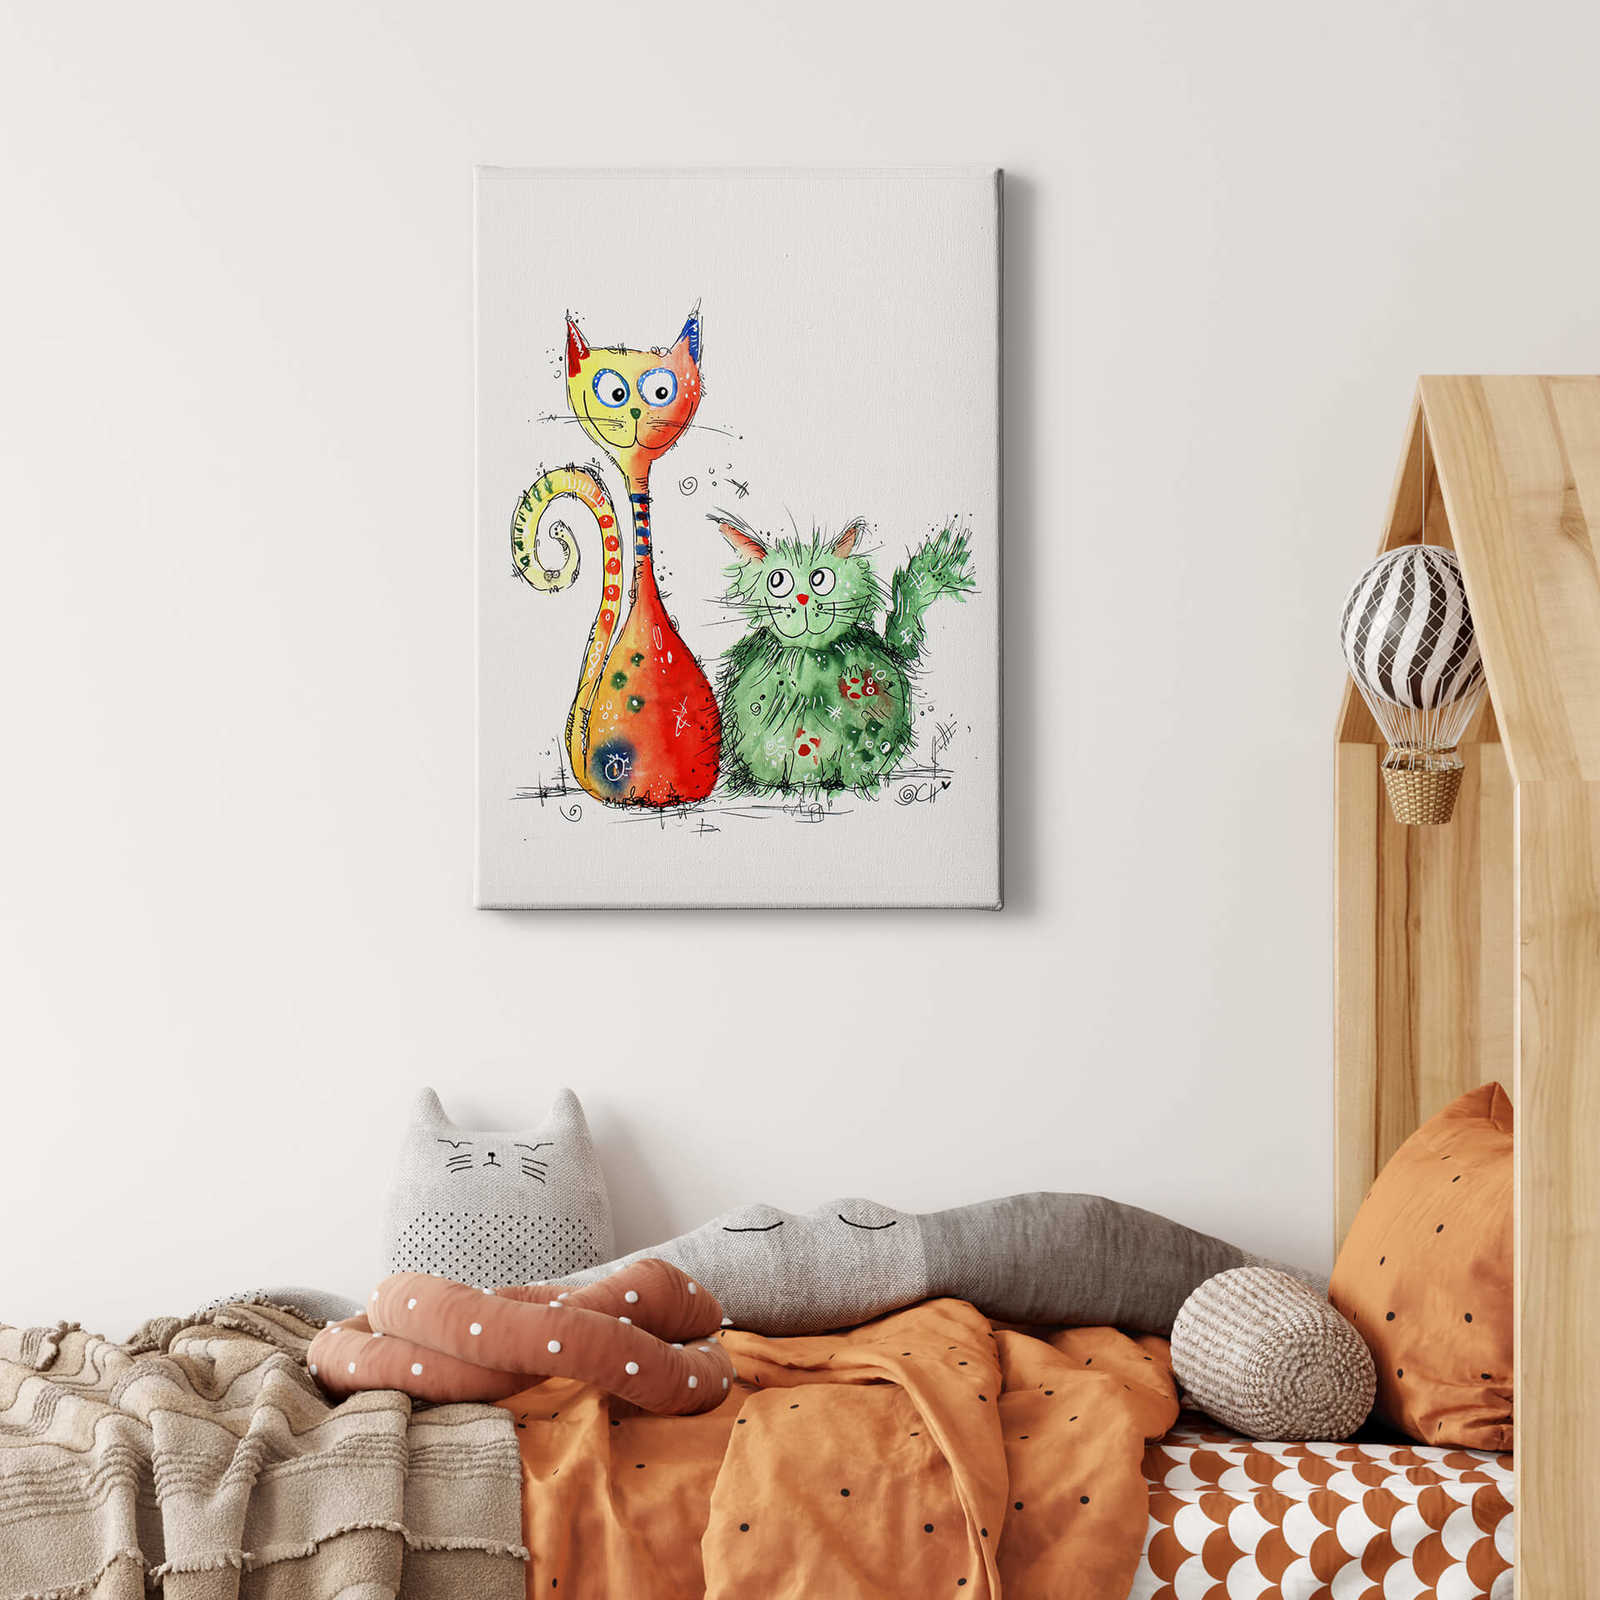             Canvas print best friends, colourful cats by Hagenmeyer
        